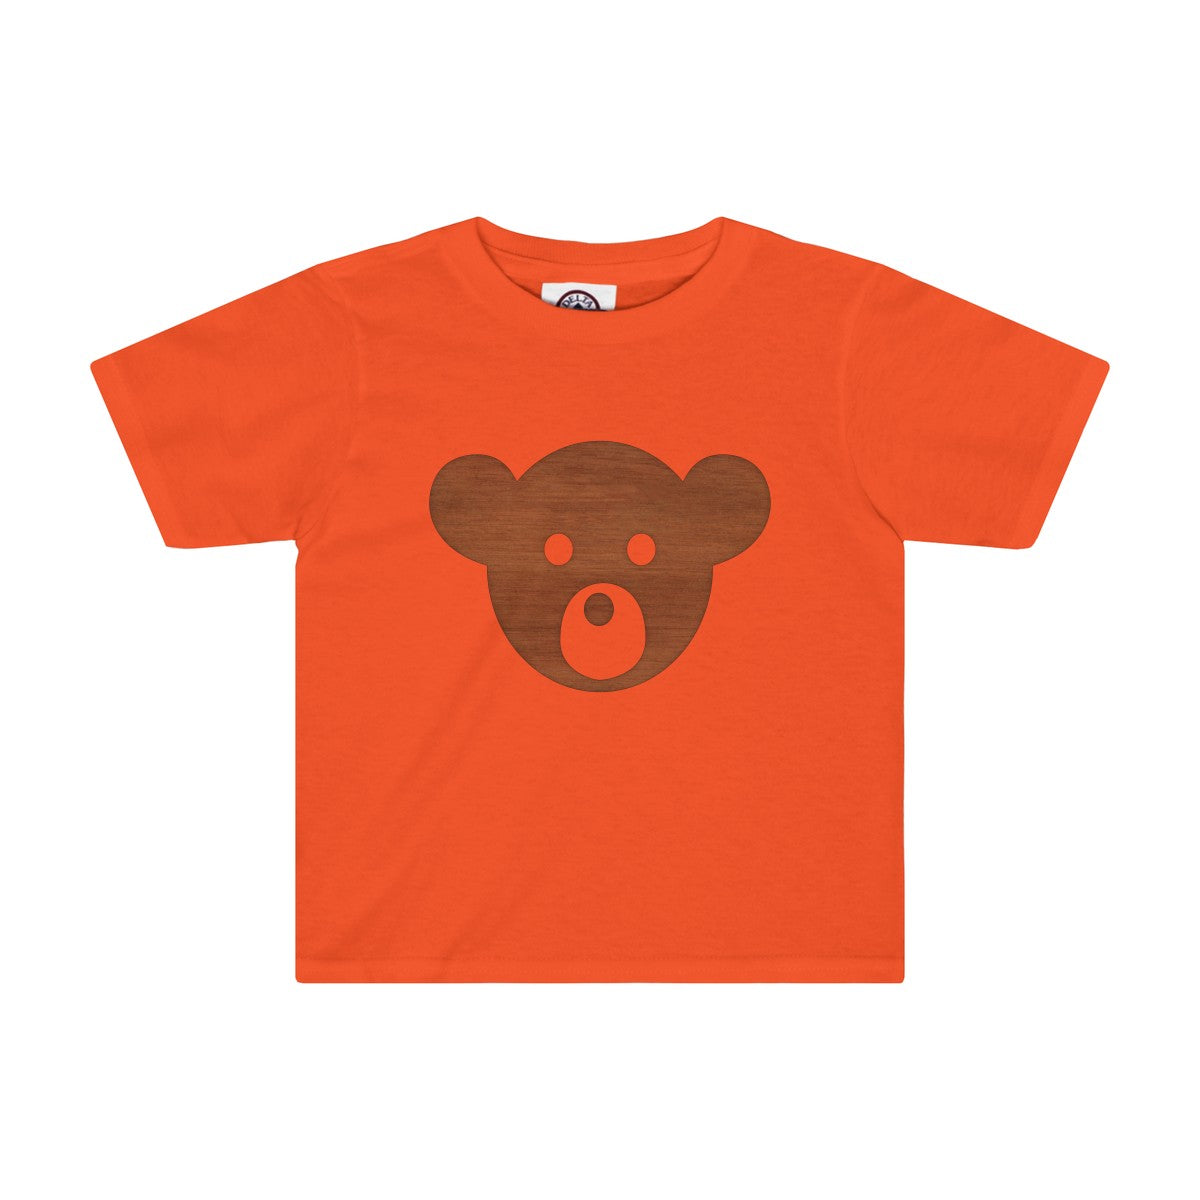 Teddy Bear Face Kids Tee-Kids clothes-PureDesignTees